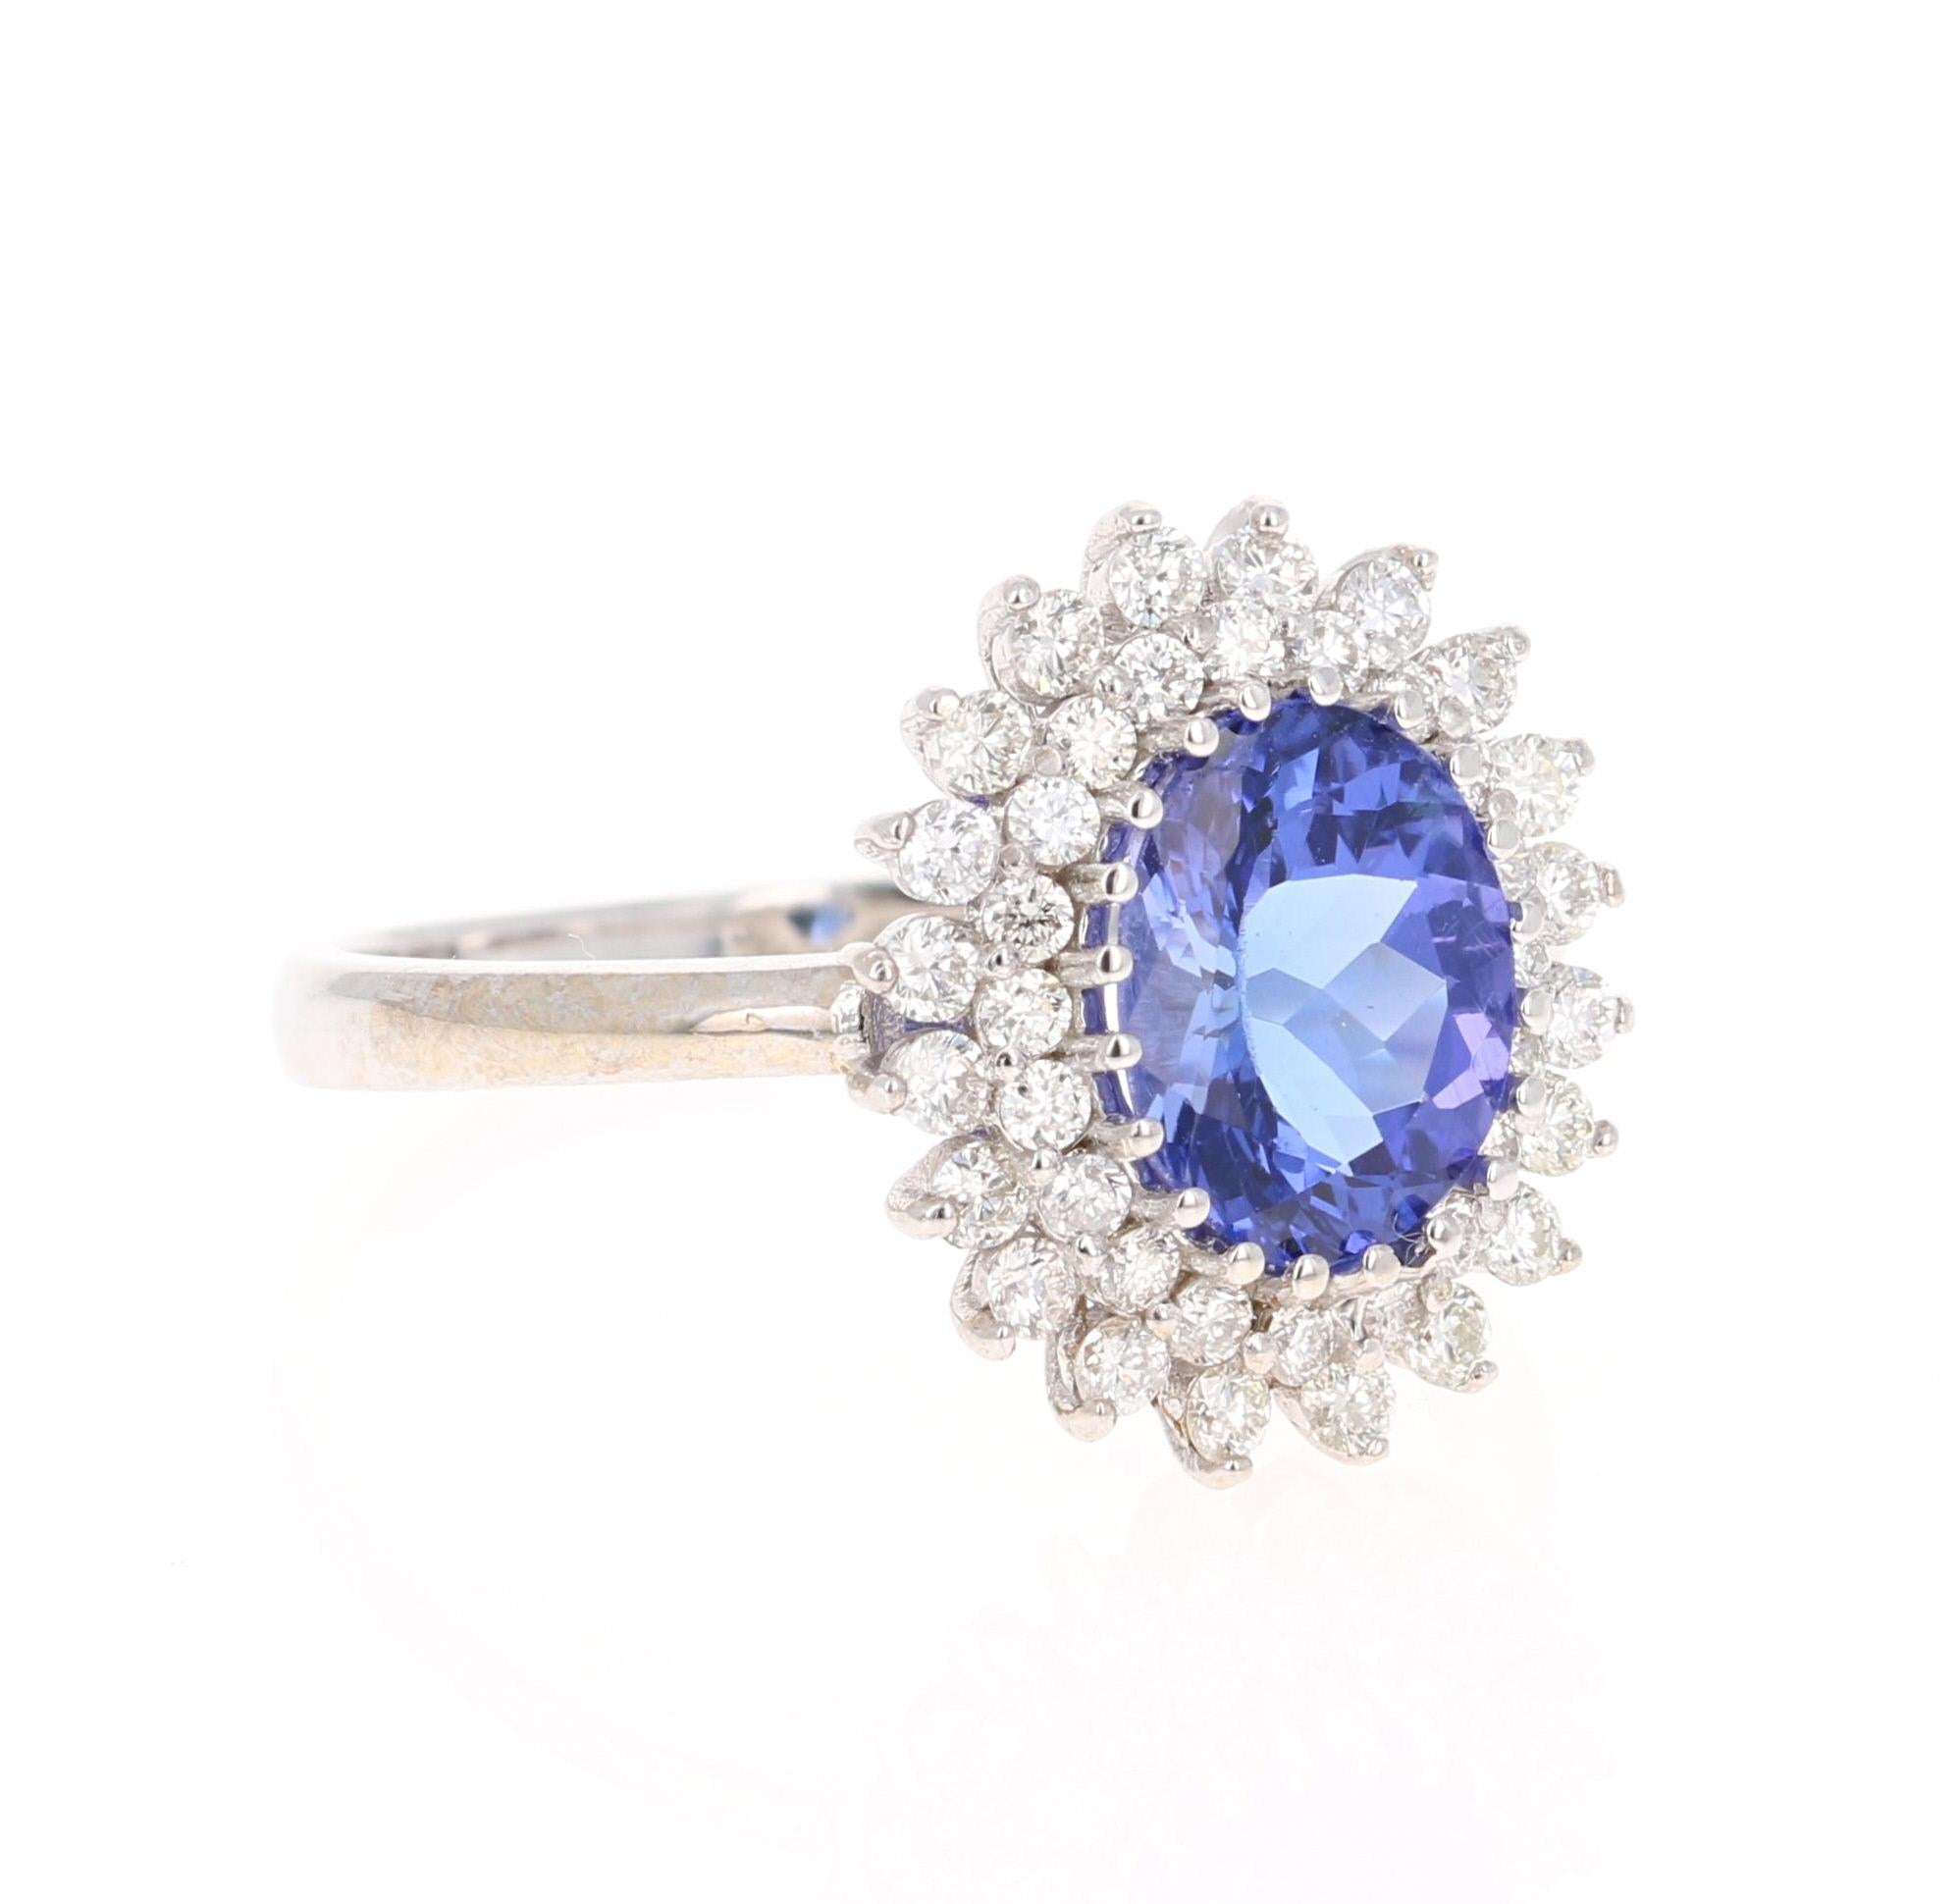 This beautiful ring has a vivid 1.69 Carat Oval Cut Tanzanite. The Tanzanite is surrounded by 40 Round Cut Diamonds that weigh 0.54 carats. (Clarity: VS, Color: H) The total carat weight of the ring is 2.23 carats. 

The ring is made in 18K White